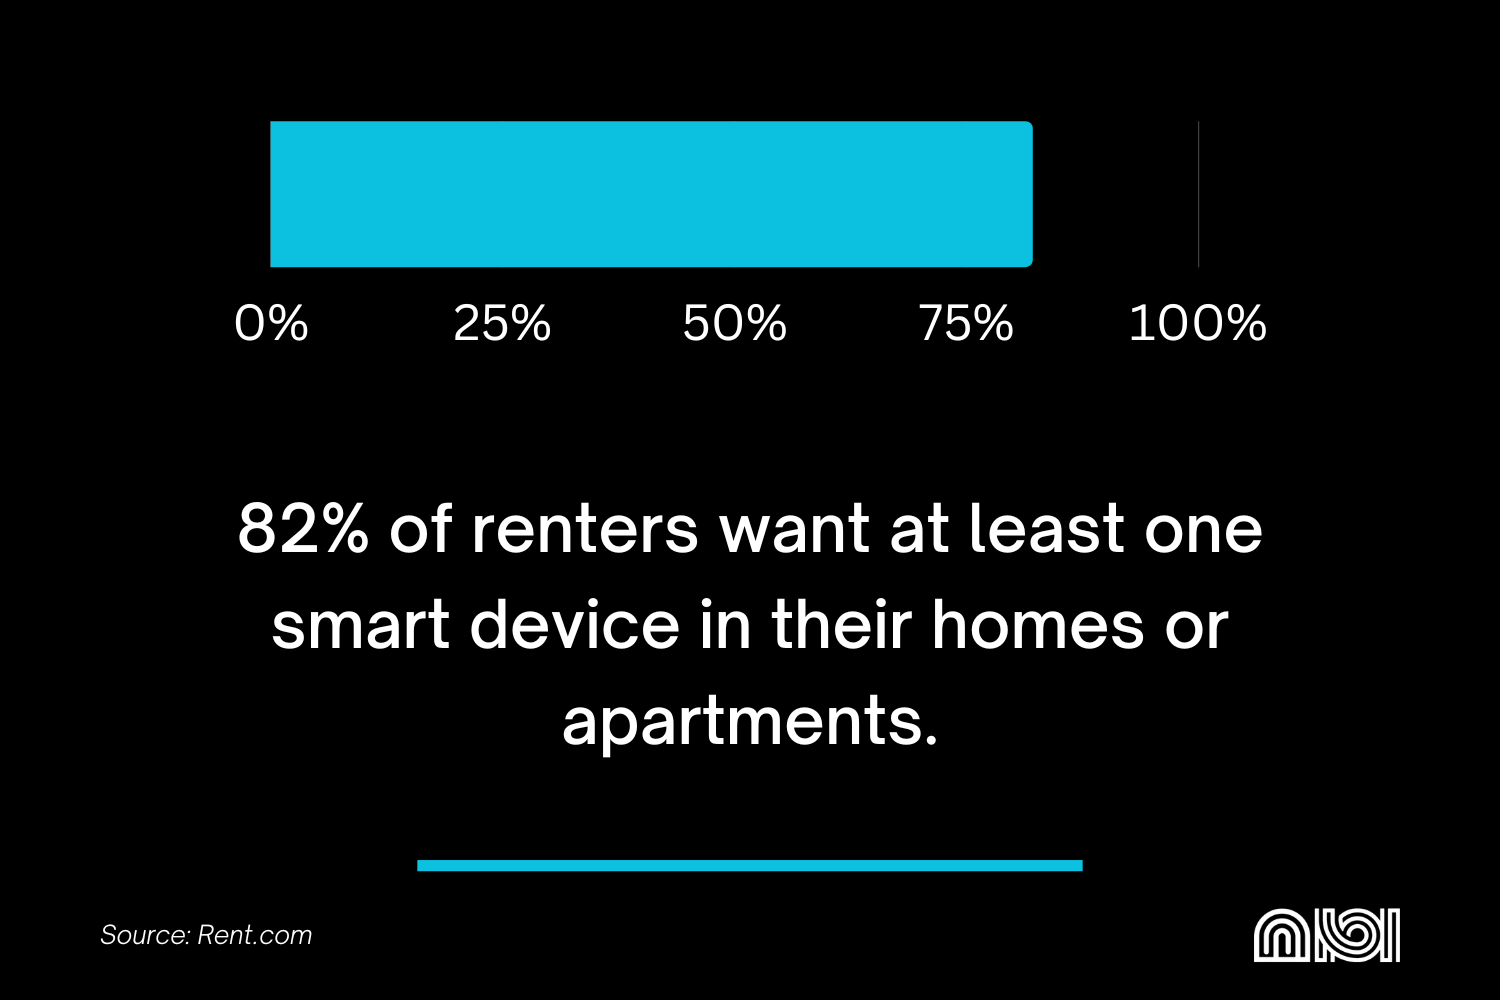 82% of renters desiring at least one smart device in their living spaces